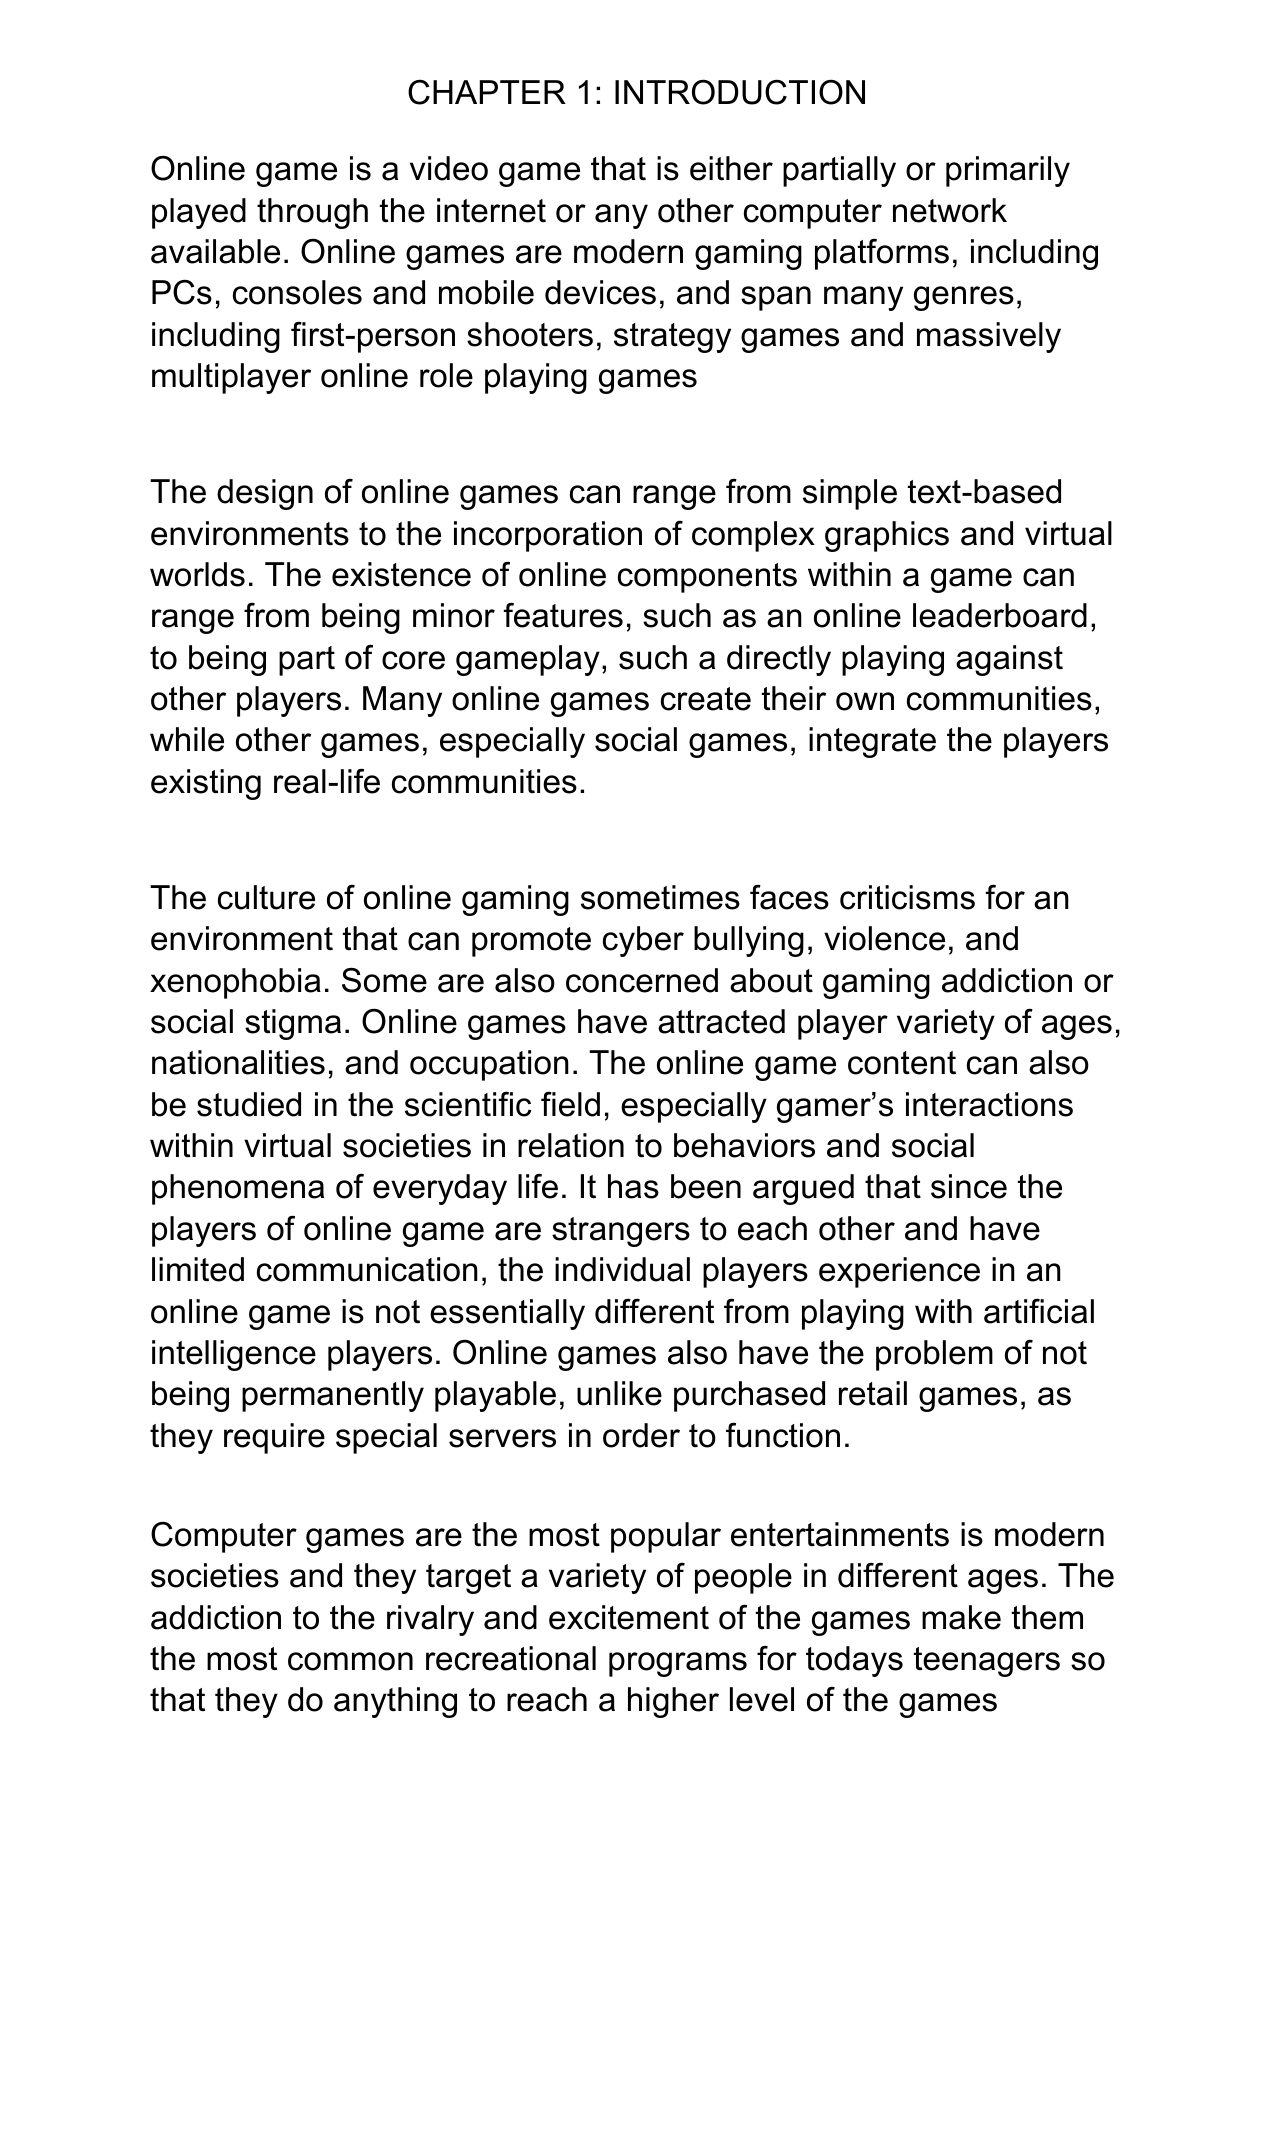 impact of computer games on society and individuals